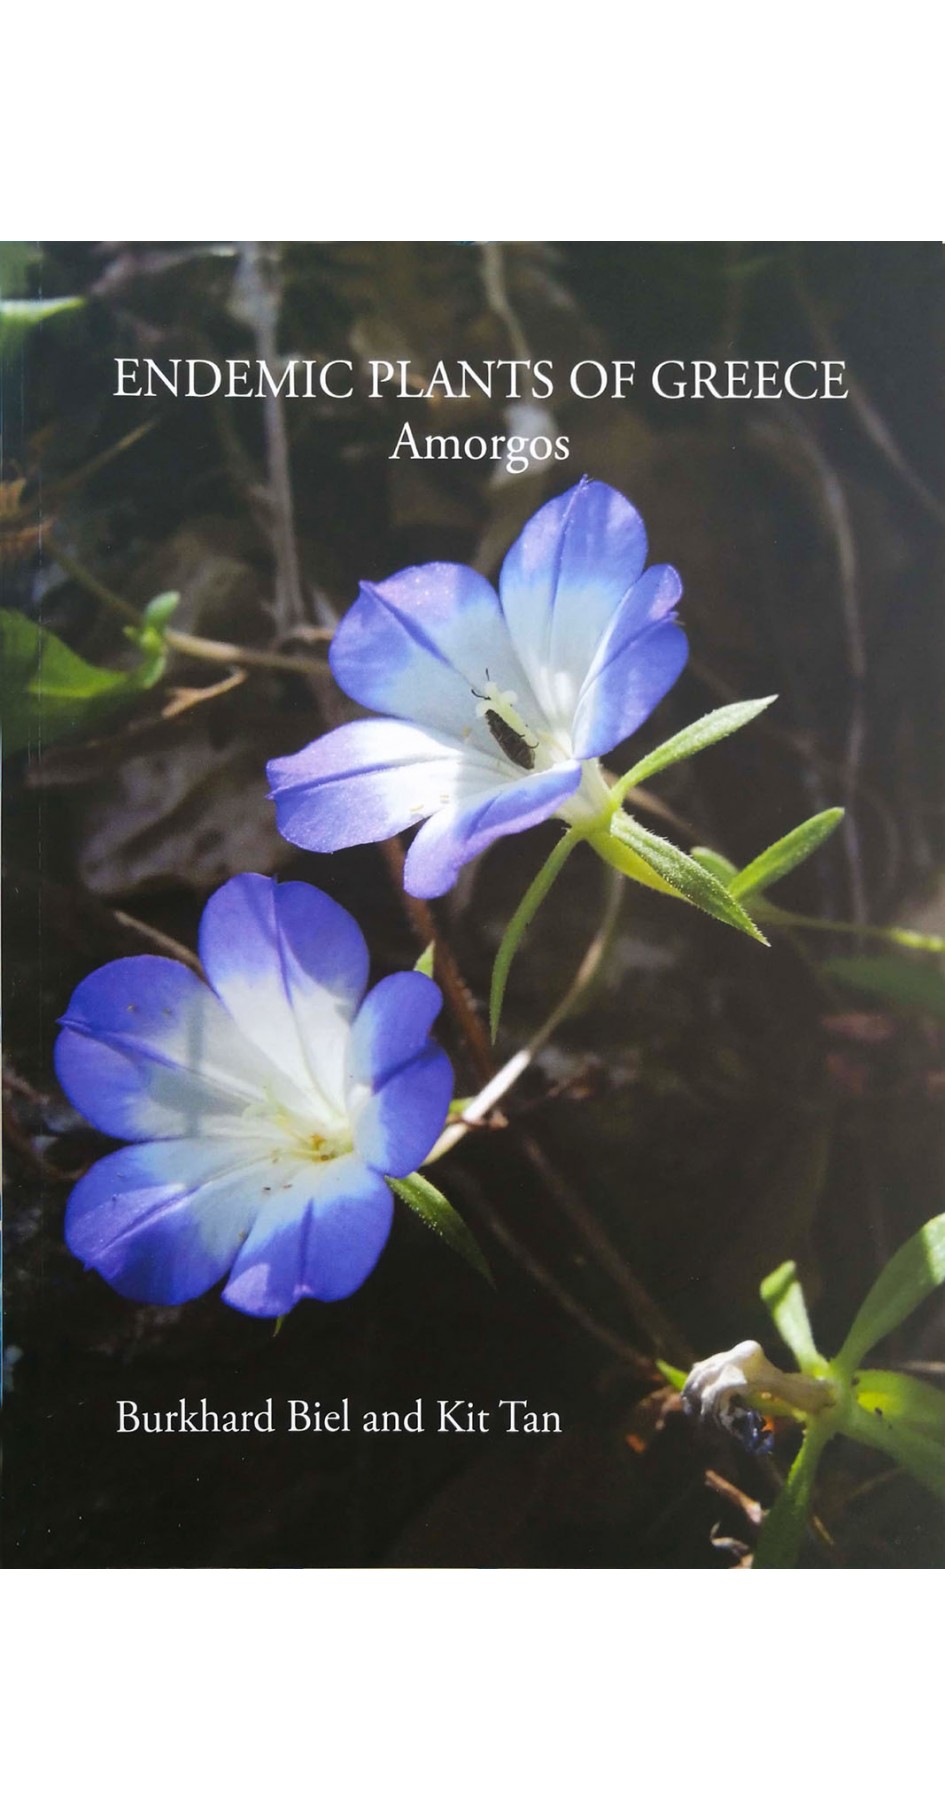 The Flora of Amorgos (cover is different)